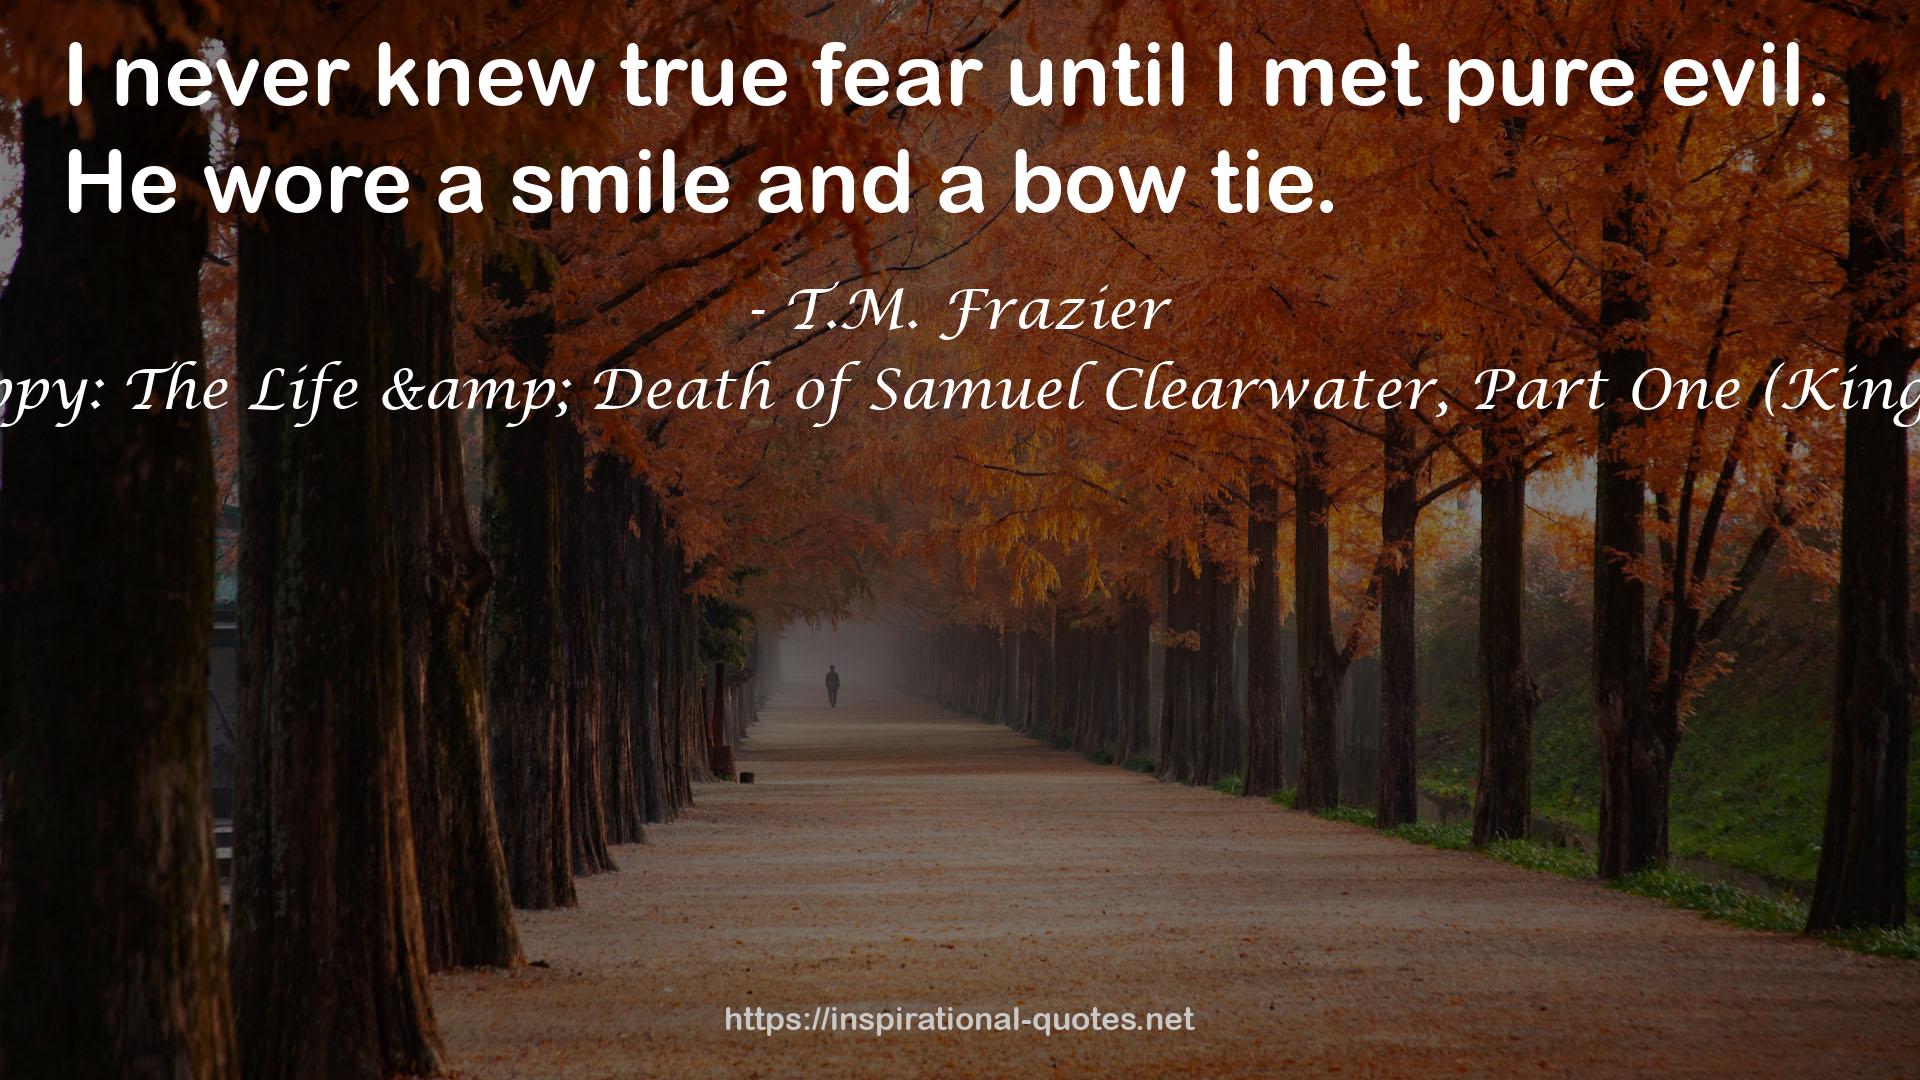 Preppy: The Life & Death of Samuel Clearwater, Part One (King, #5) QUOTES